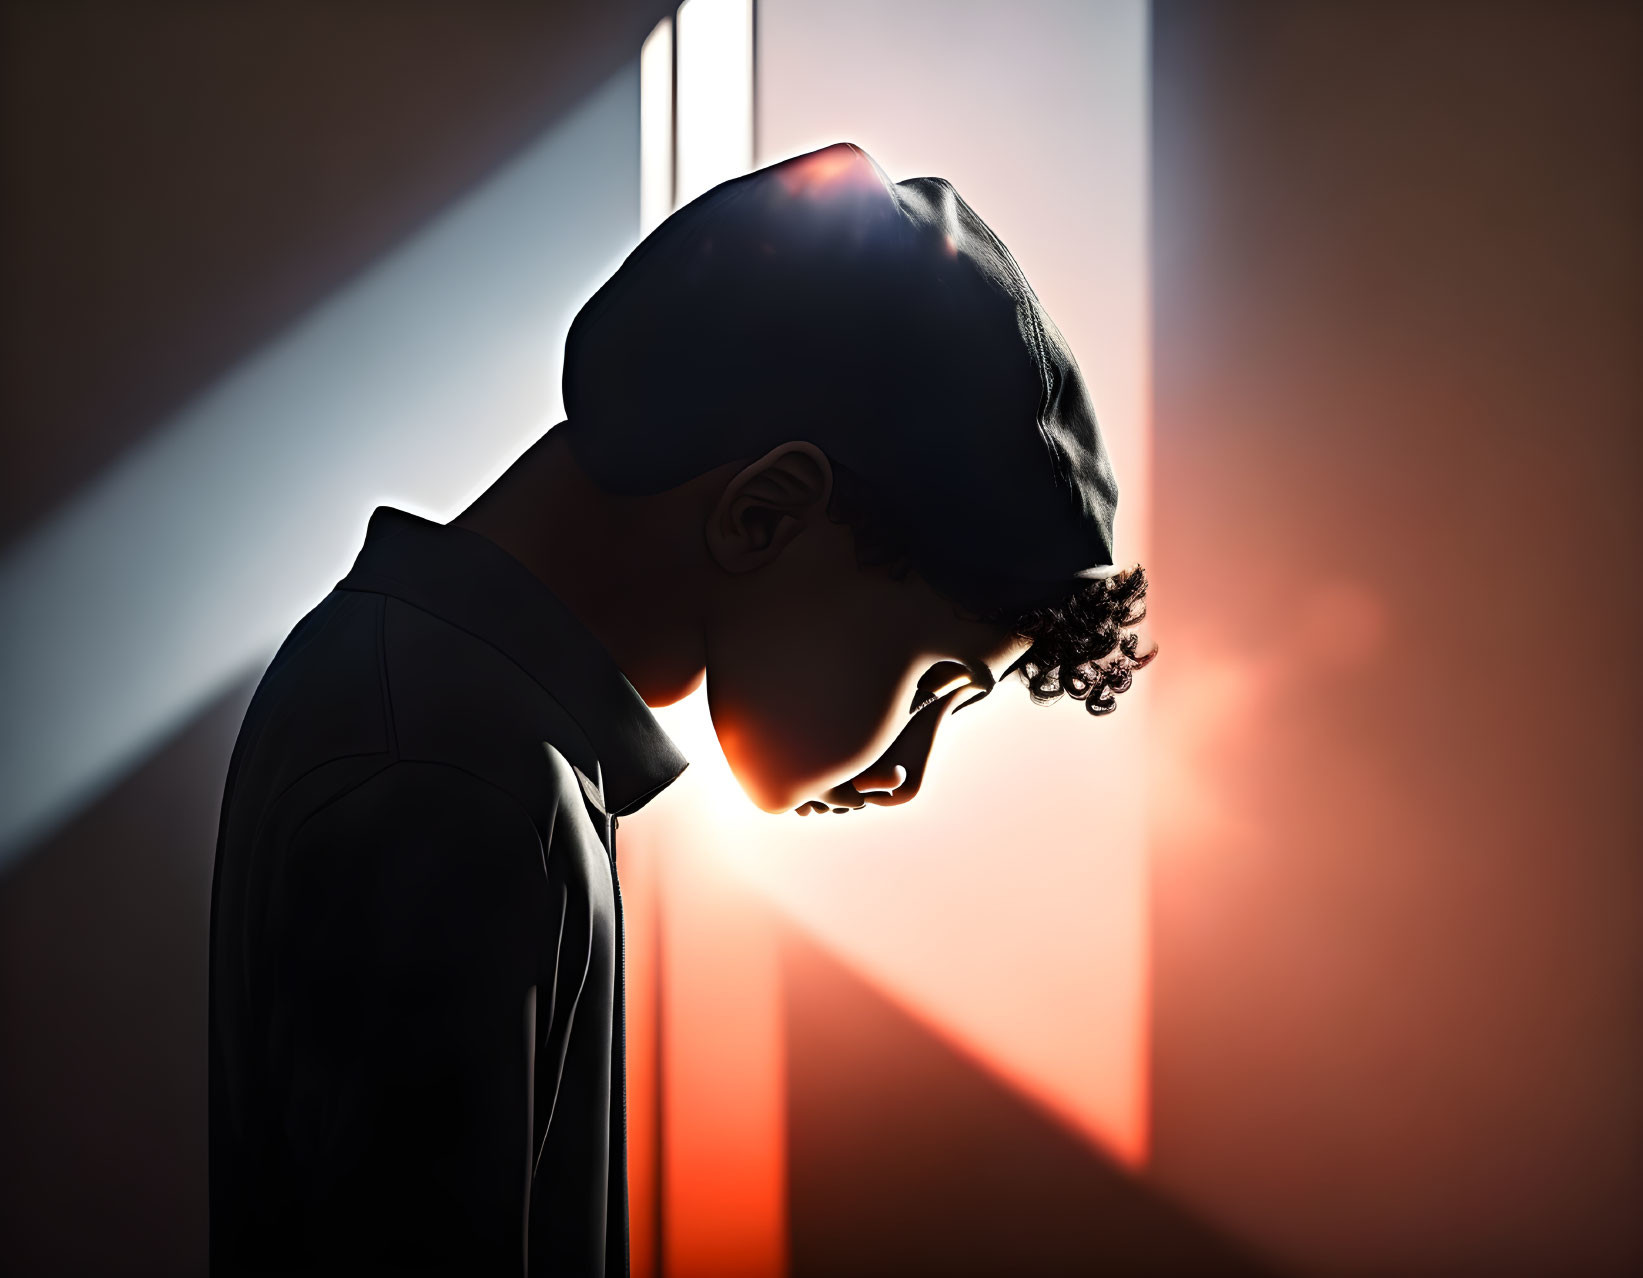 Silhouette of person with curly hair in cap and shirt against moody backdrop